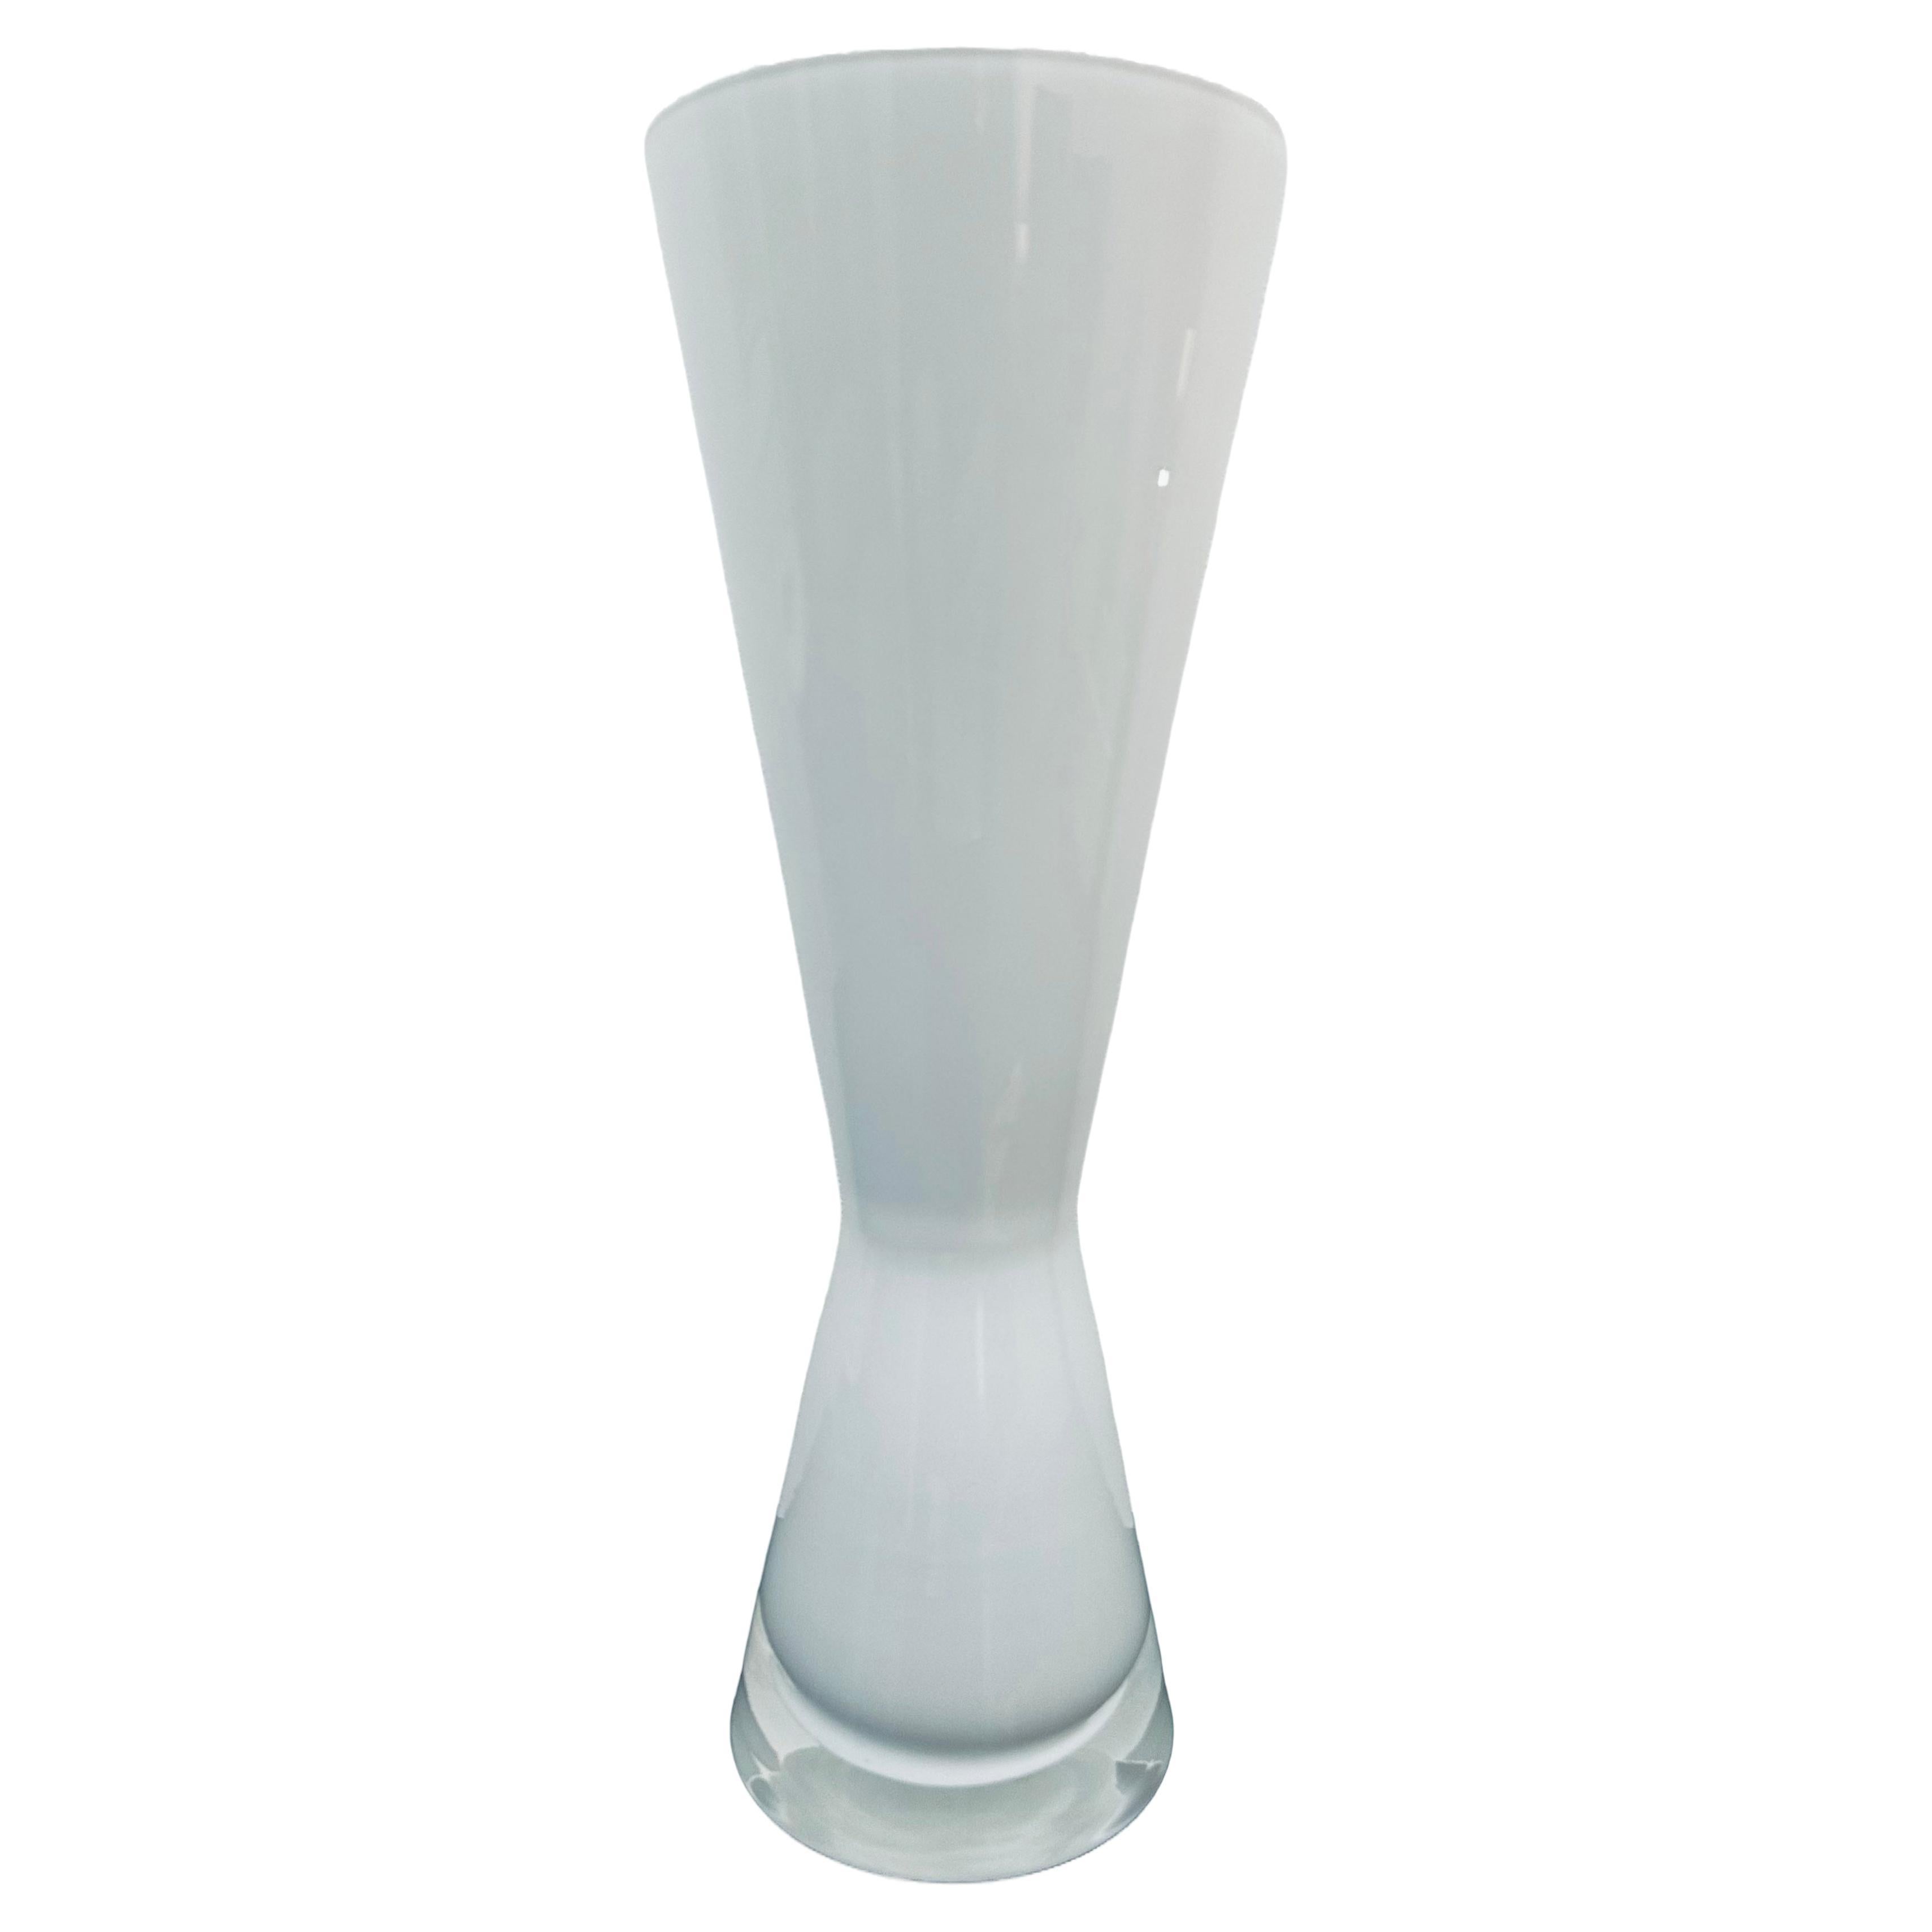 Circa 1960s Milky White & Clear Encased Conical Glass Vase attr. Holmegaard For Sale